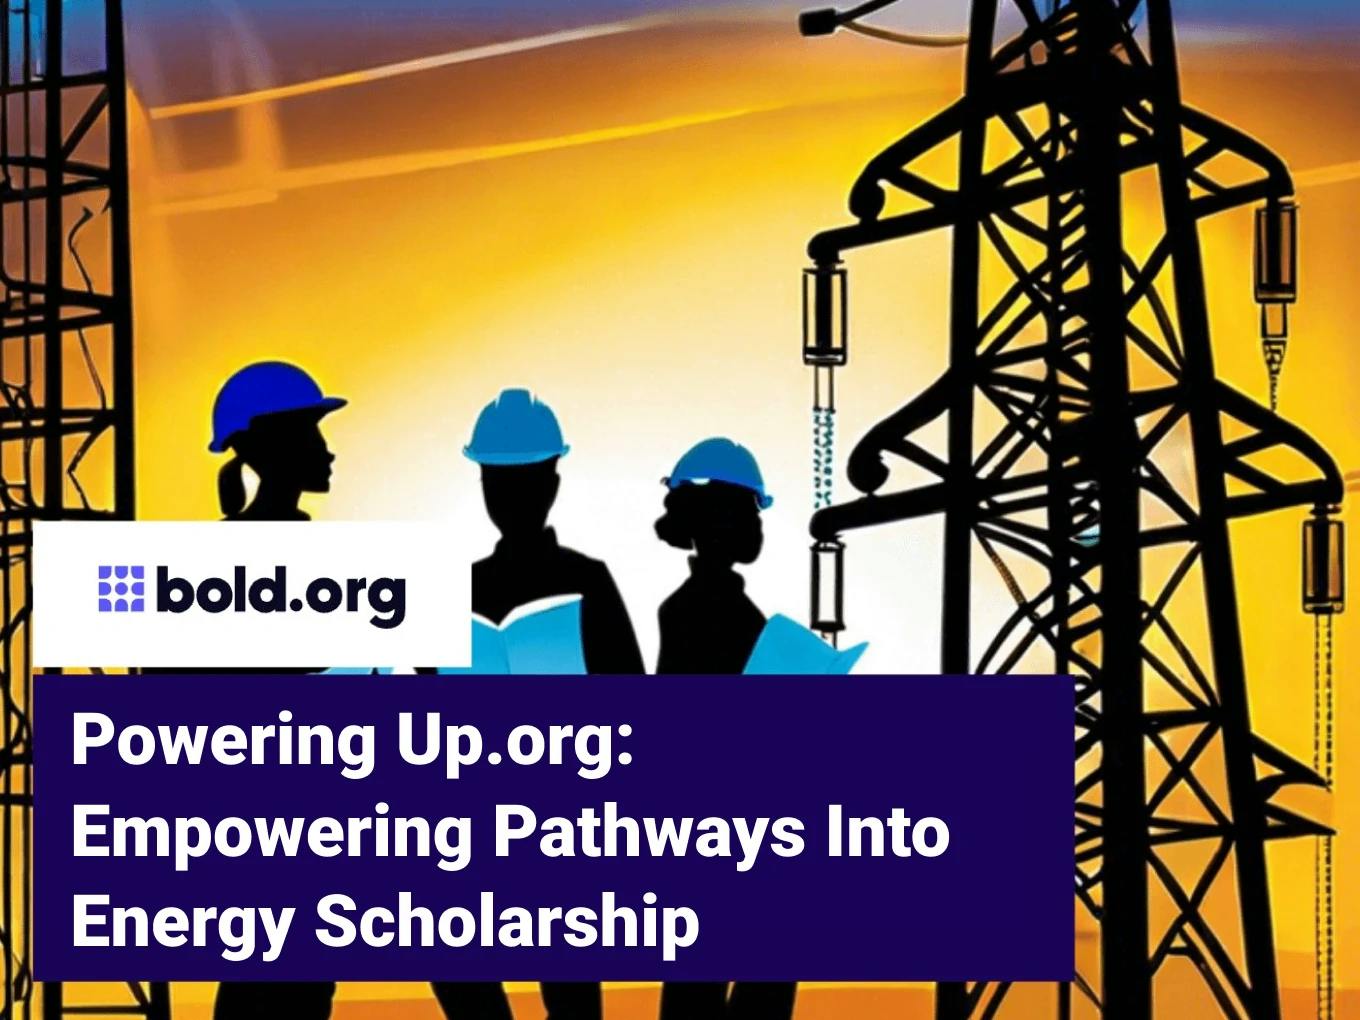 Powering Up.org: Empowering Pathways Into Energy Scholarship